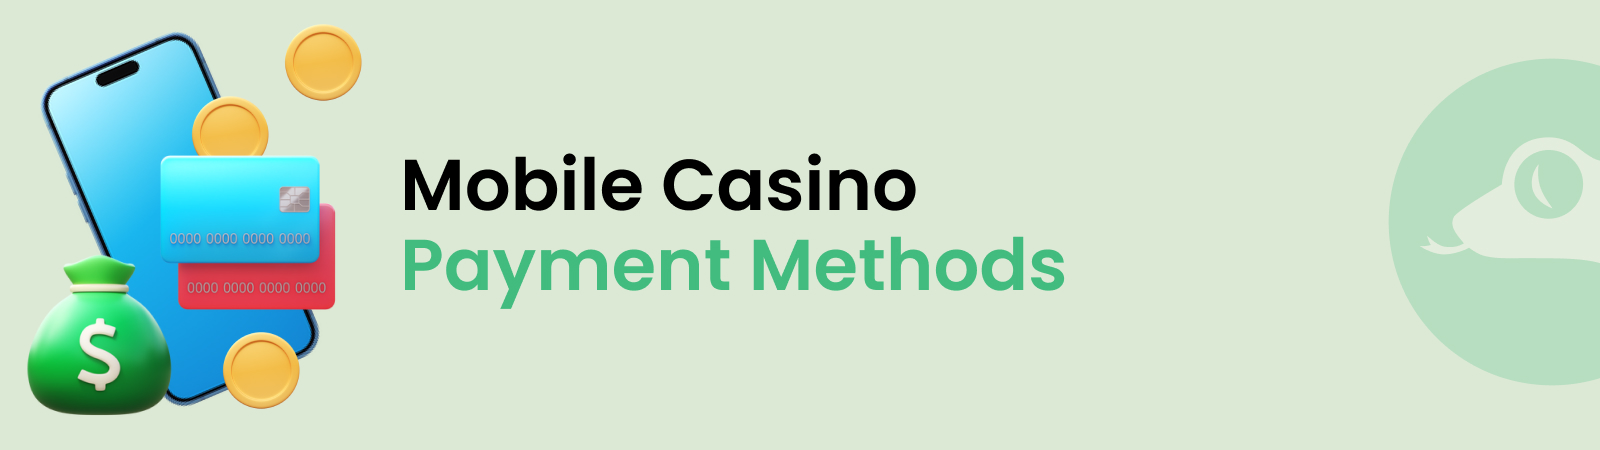 mobile casino payment methods